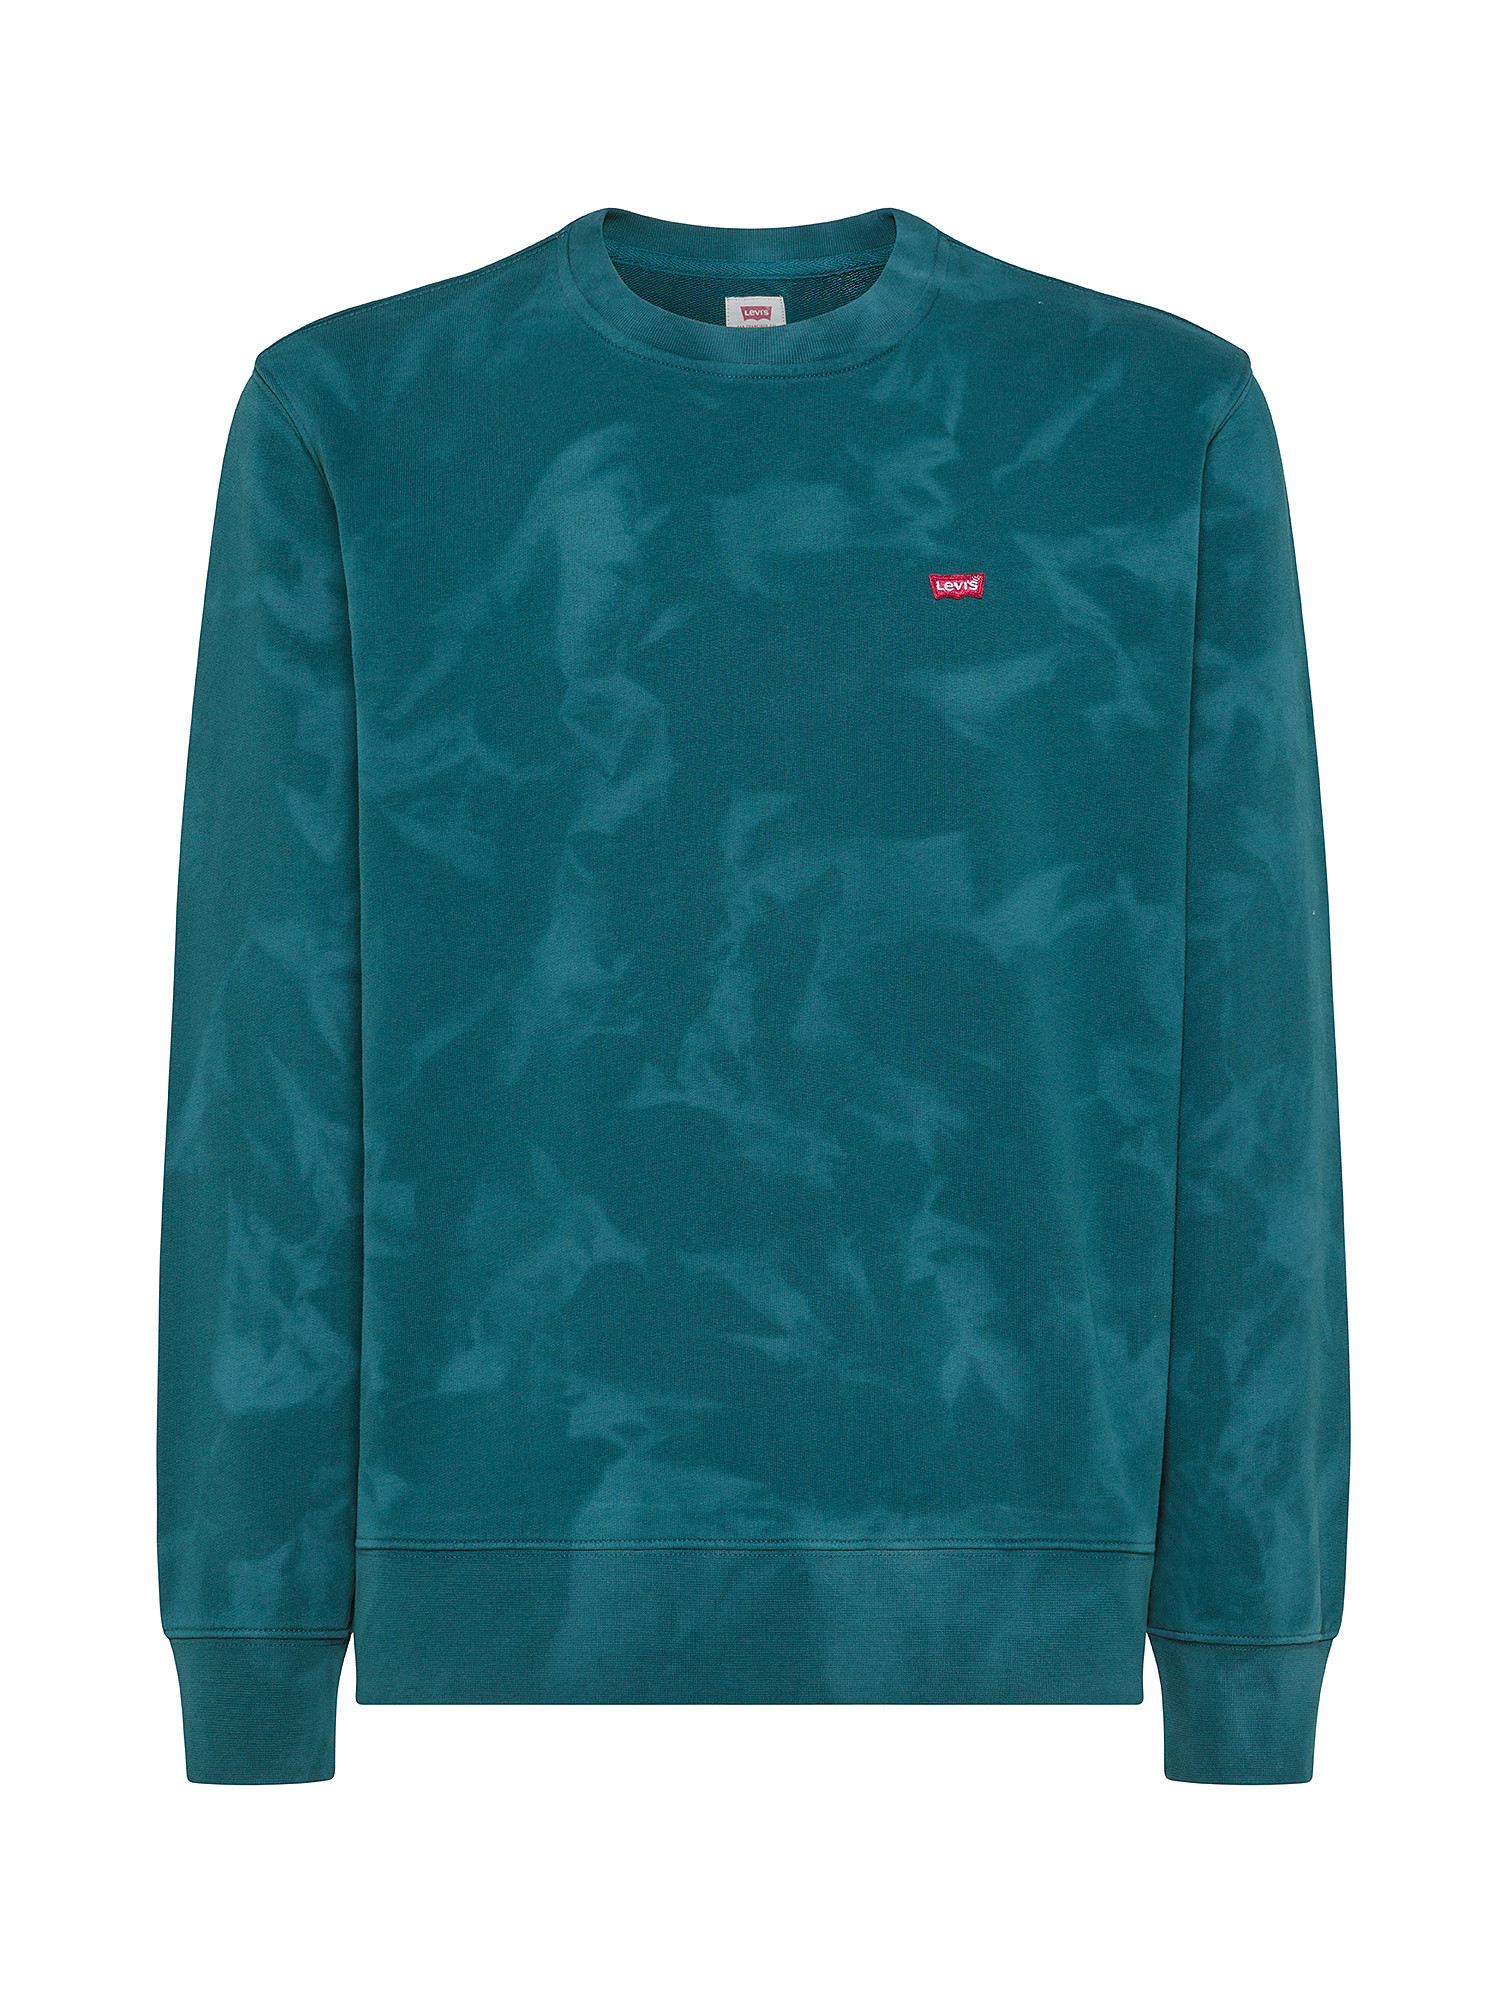 Levi's - Cotton sweatshirt with print and logo, Green, large image number 0